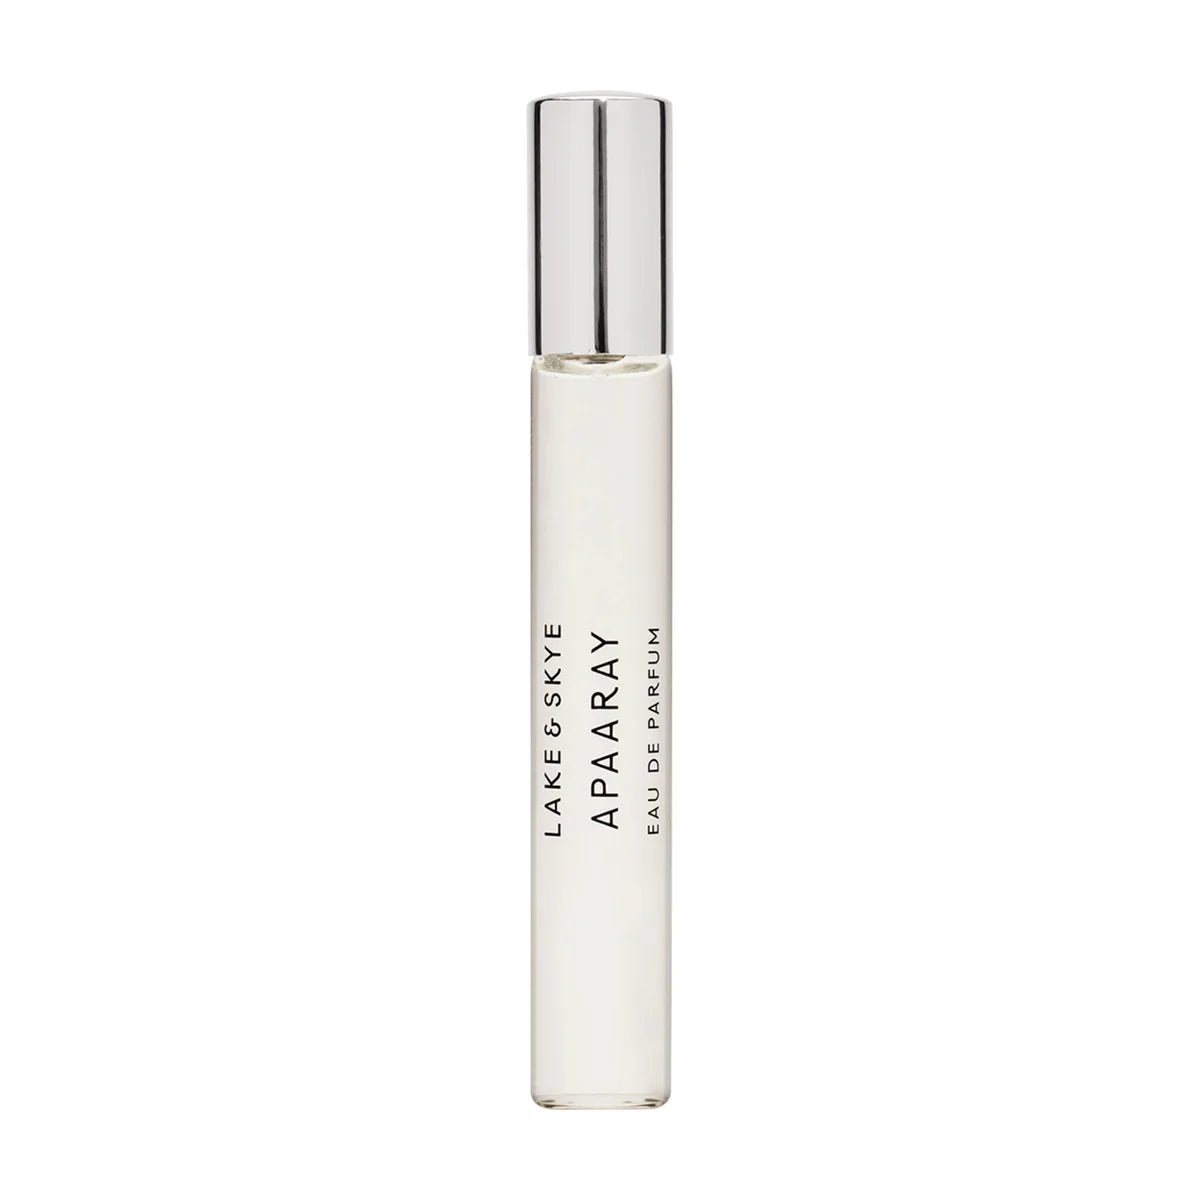 Apaaray Purse Spray - The Look and Co